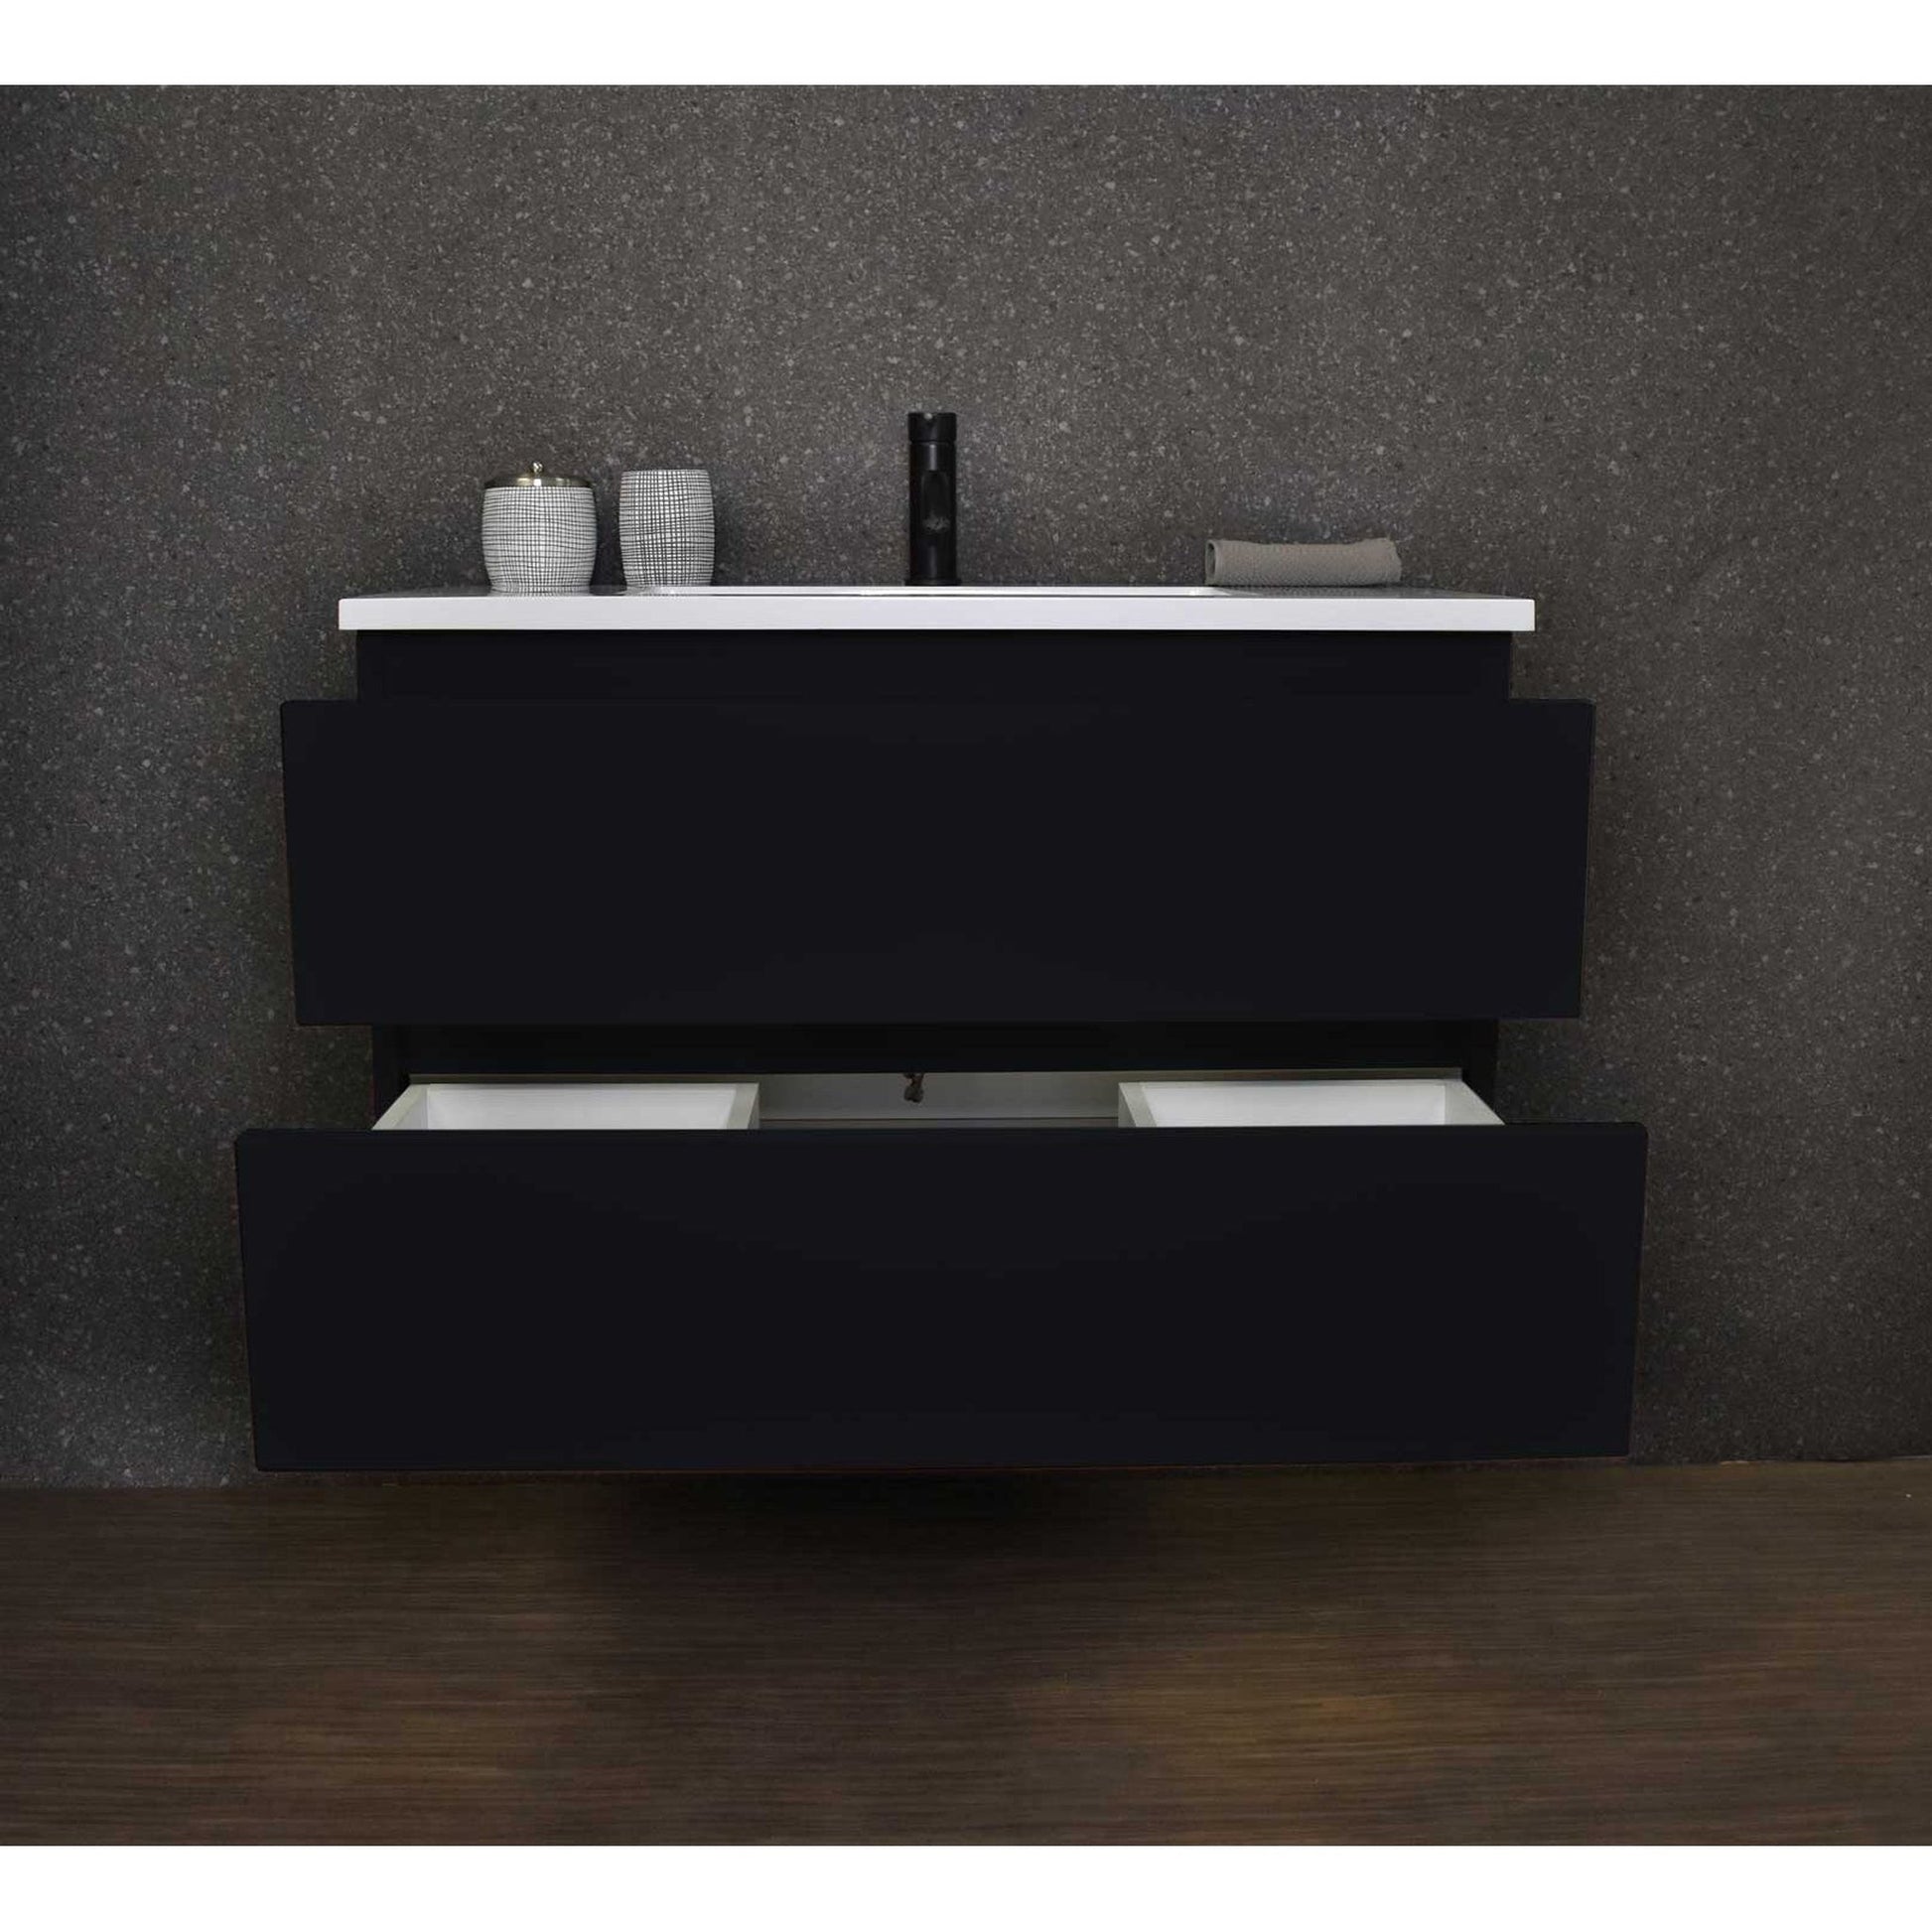 Volpa USA Salt 36" x 20" Glossy Black Wall-Mounted Floating Bathroom Vanity With Drawers, Acrylic Top and Integrated Acrylic Sink